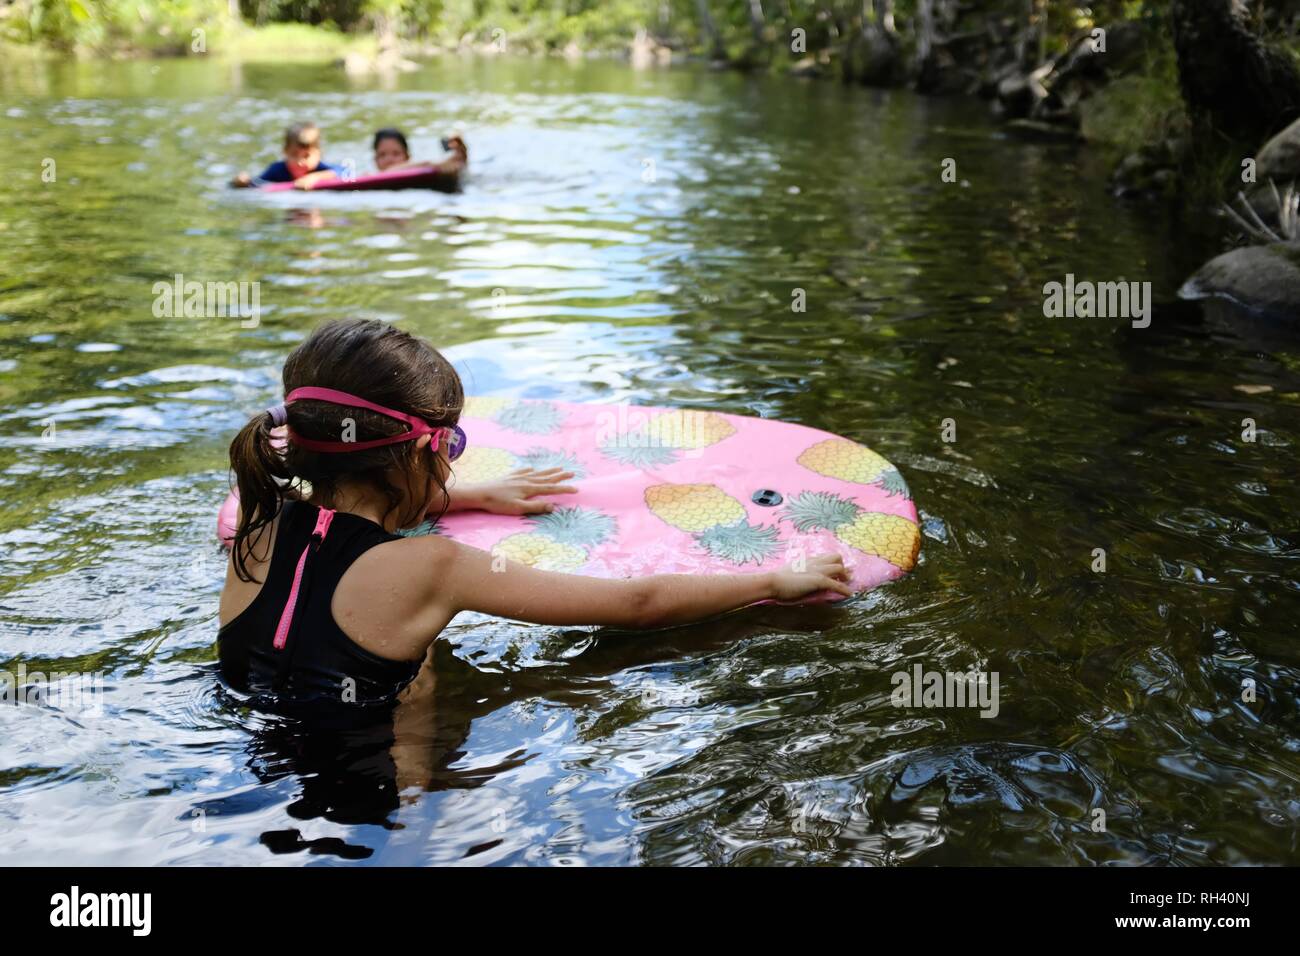 Young girl paddles on a boogie board with family in background, Finch Hatton, Queensland 4756, Australia Stock Photo